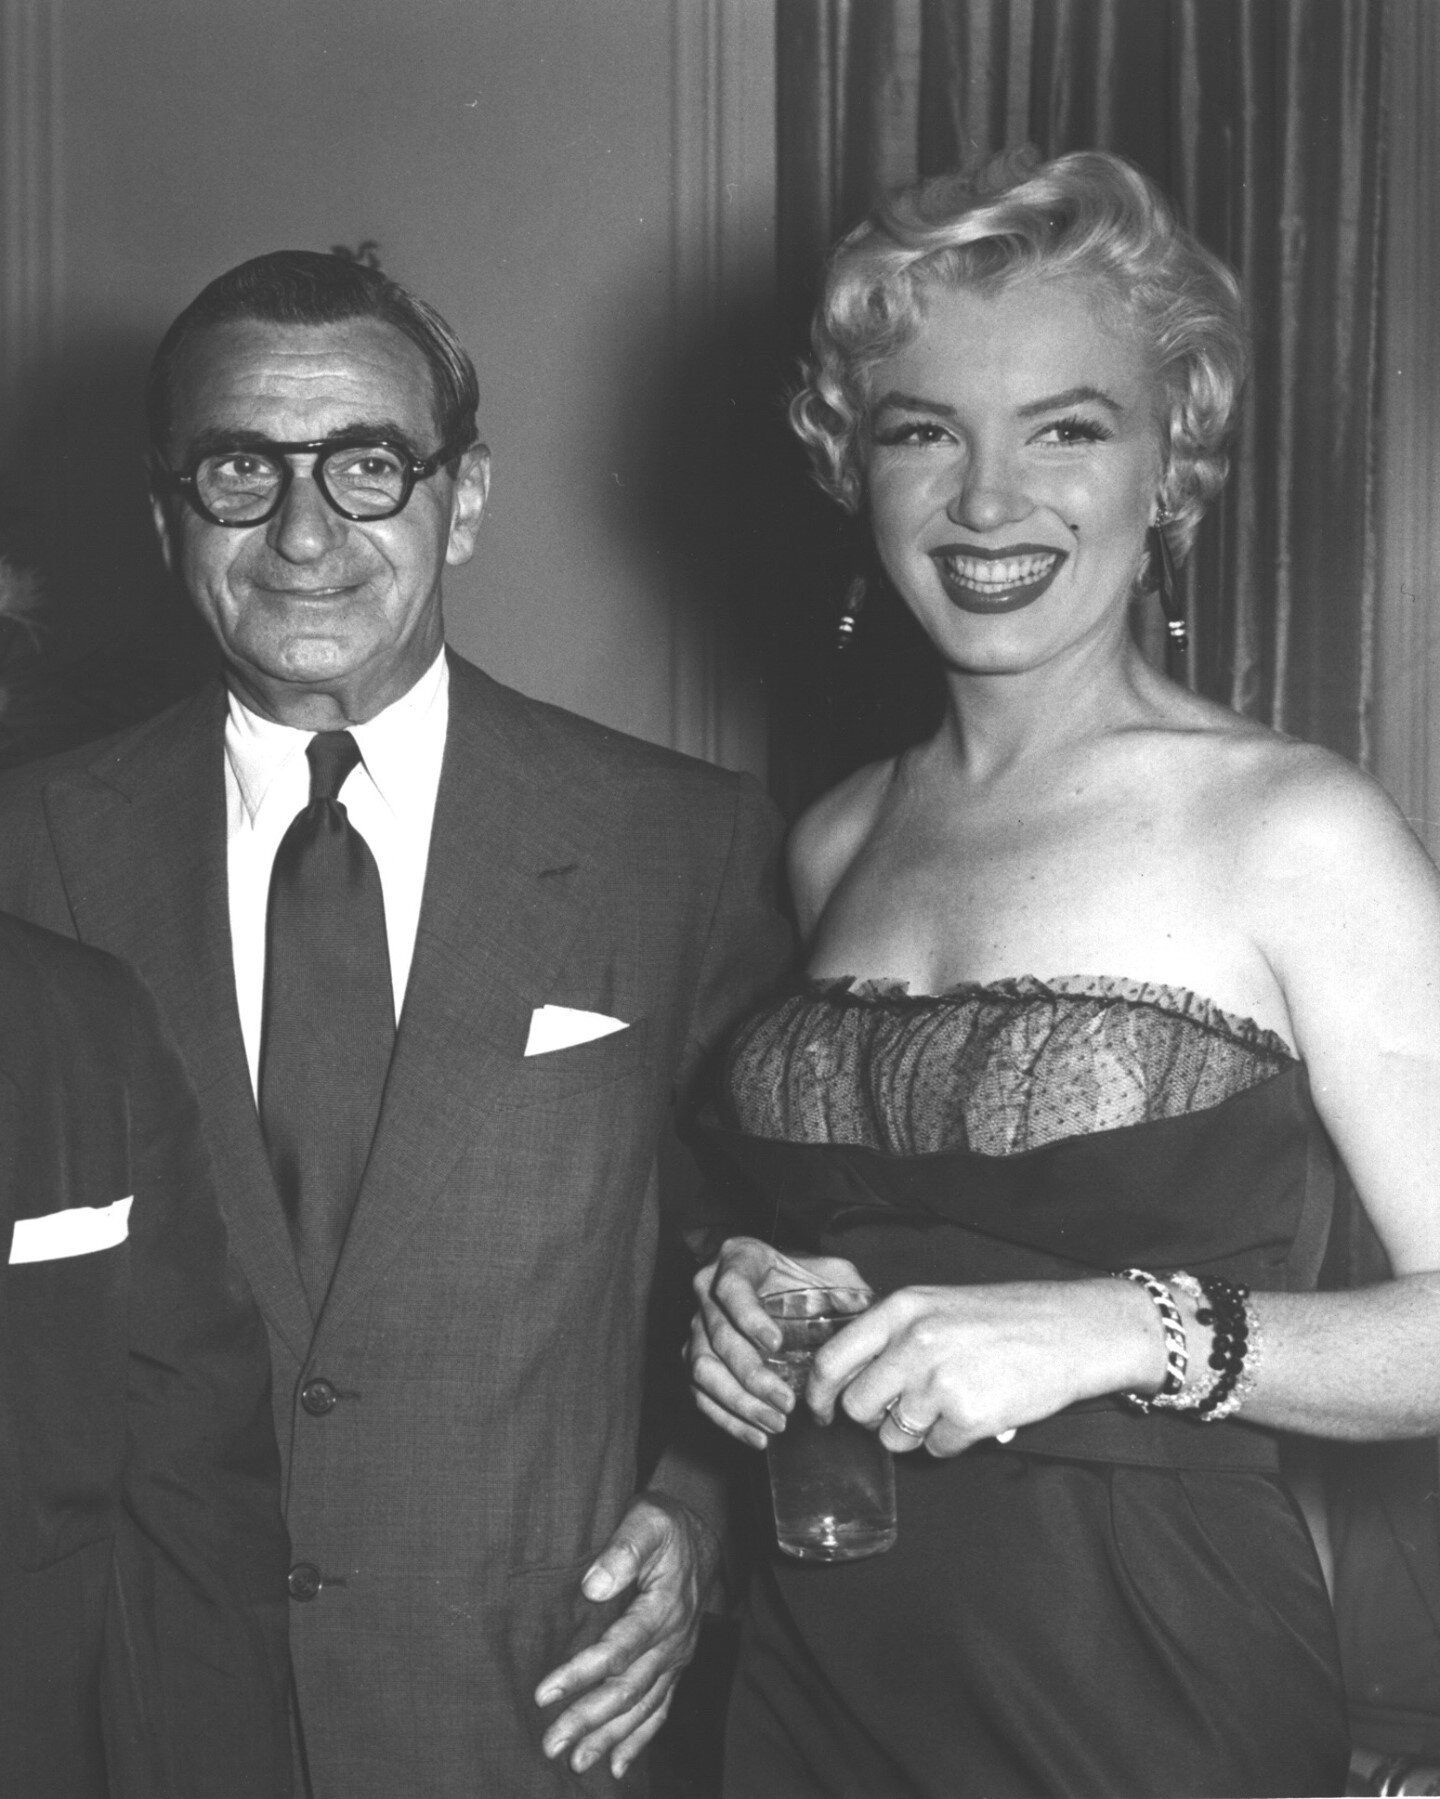 #FlashbackFriday Happy belated birthday to the one and only @MarilynMonroe! Pictured here is Irving Berlin with the iconic actress at a press party in 1954. ❤️

Can you guess which Irving Berlin film Marilyn starred in that SAME year? Leave your gues